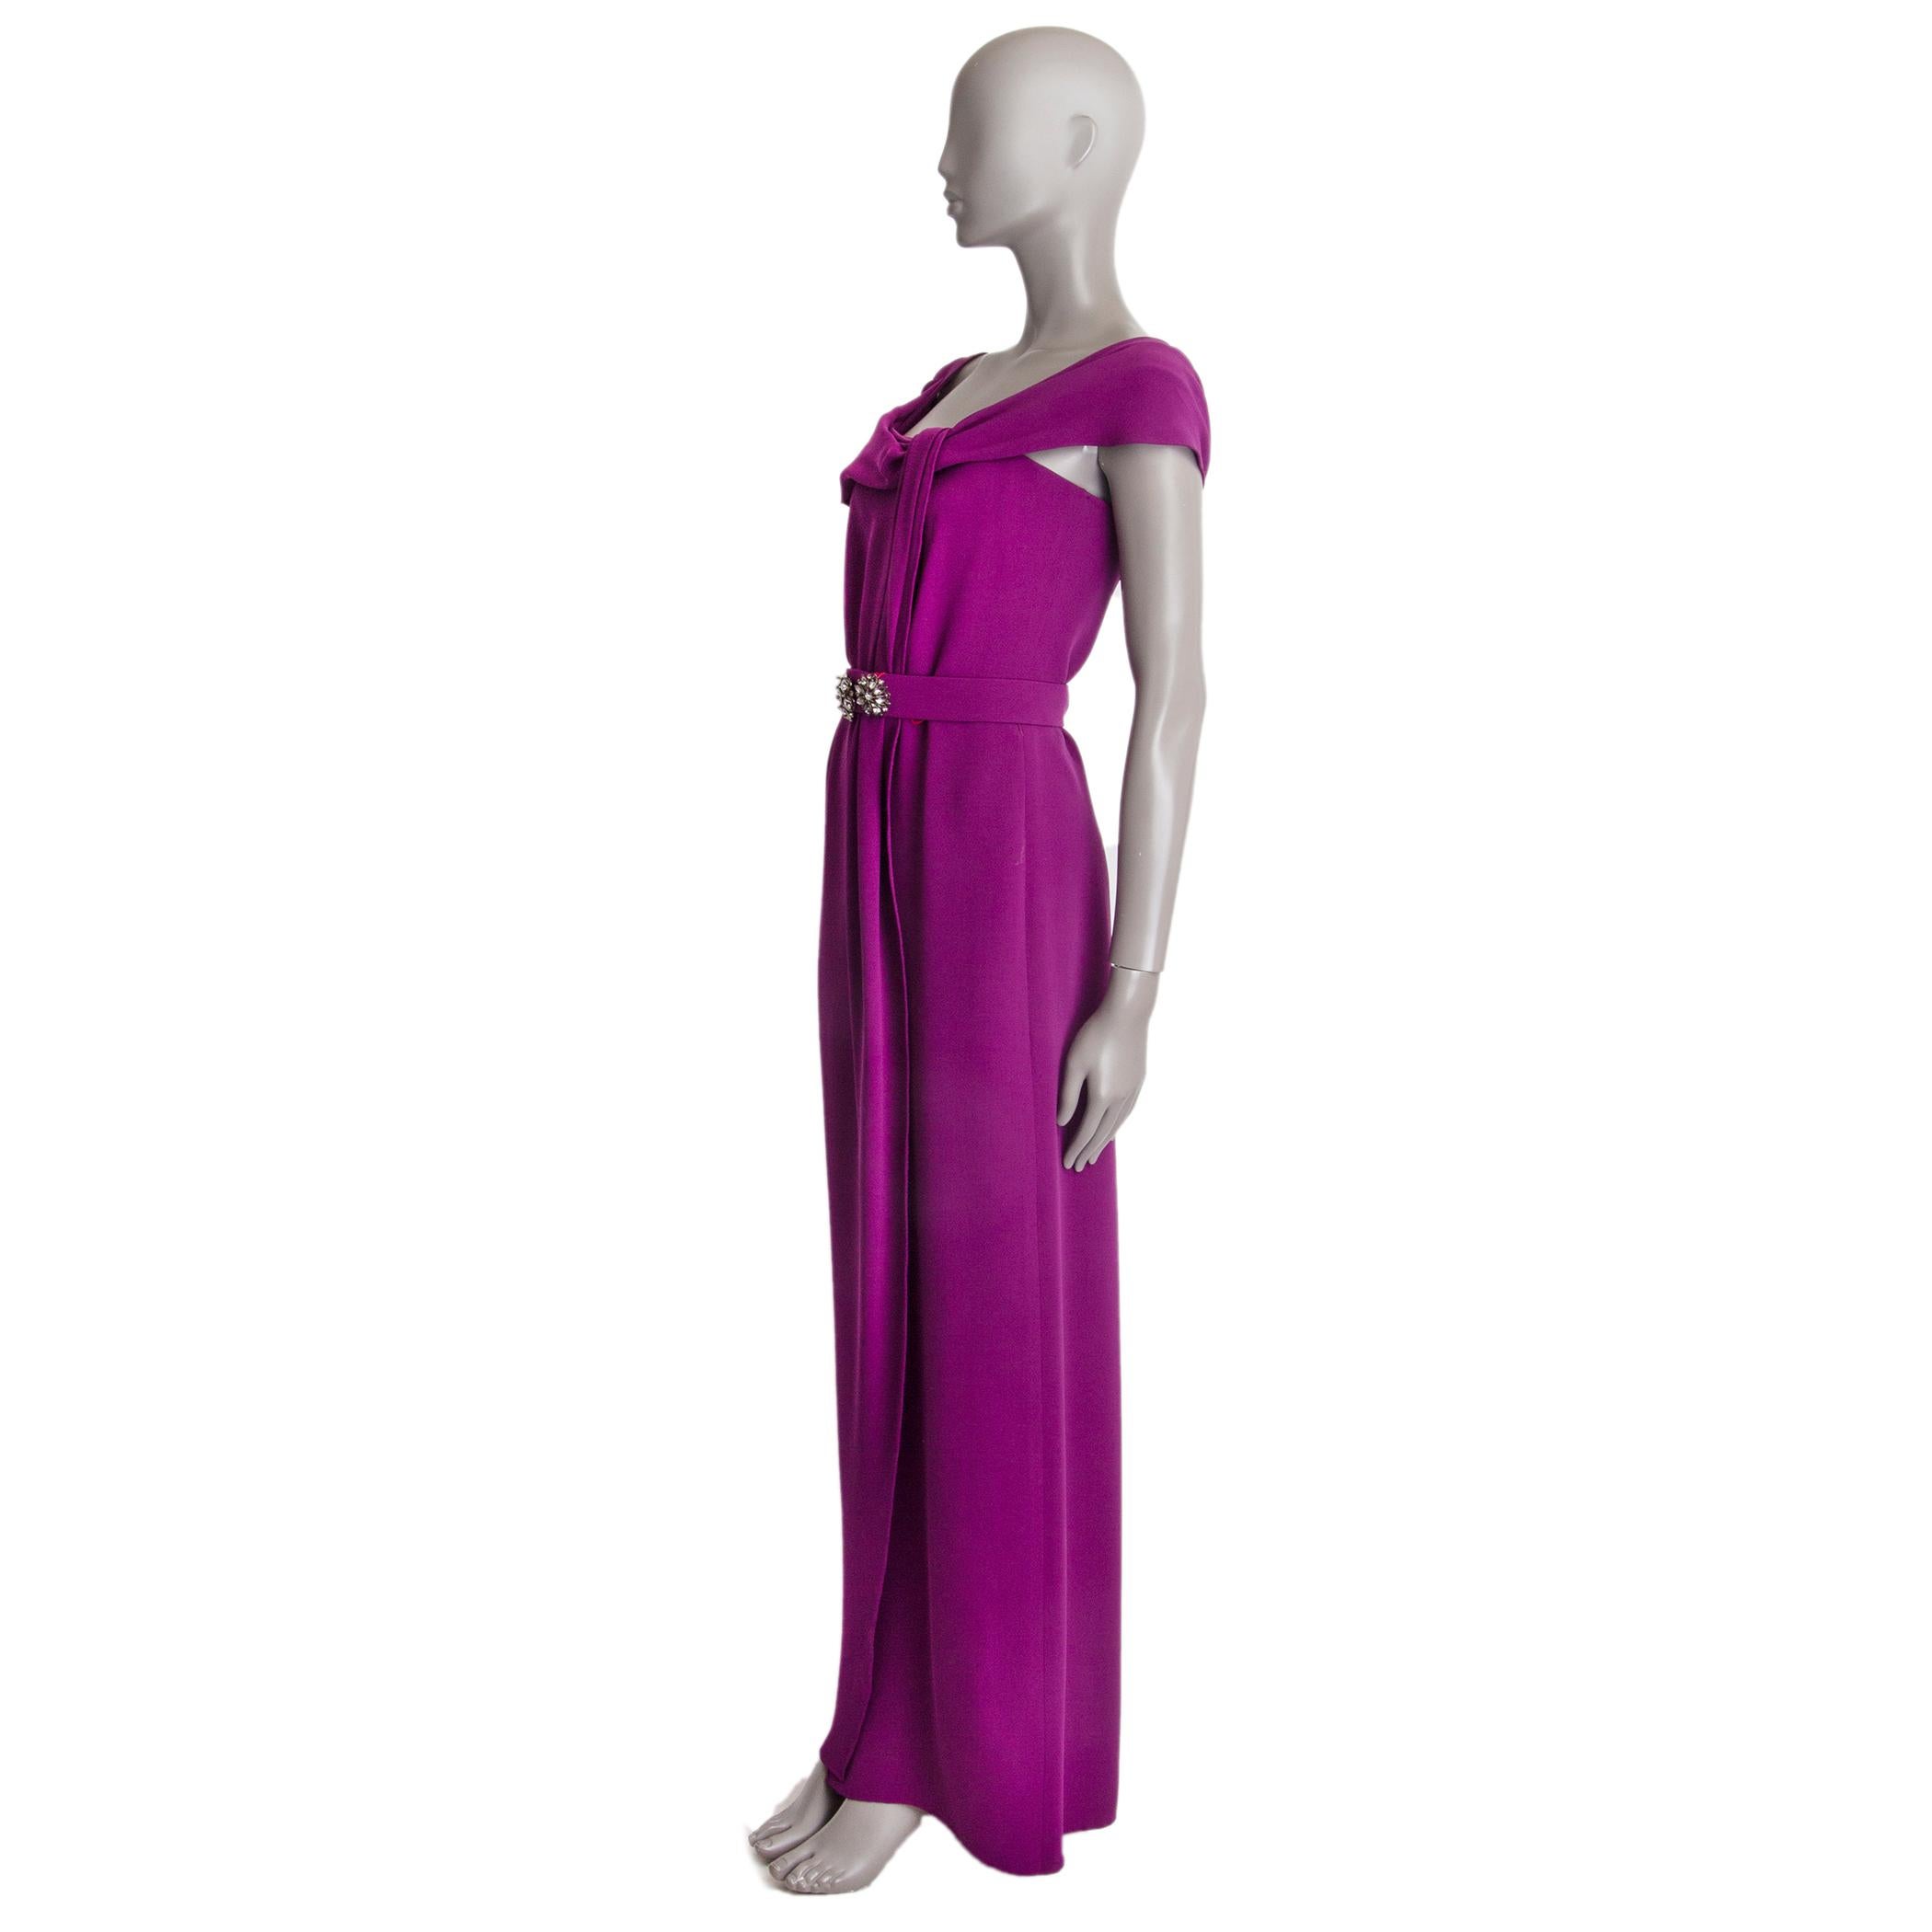 100% authentic Oscar De La Renta sleeveless dress in orchid silk (100%) with a folded collar. Closes on the back with a concealed zipper. Comes with a matching belt featuring decorative rhinestone-embellished buttons and snap-on closures. Lined in